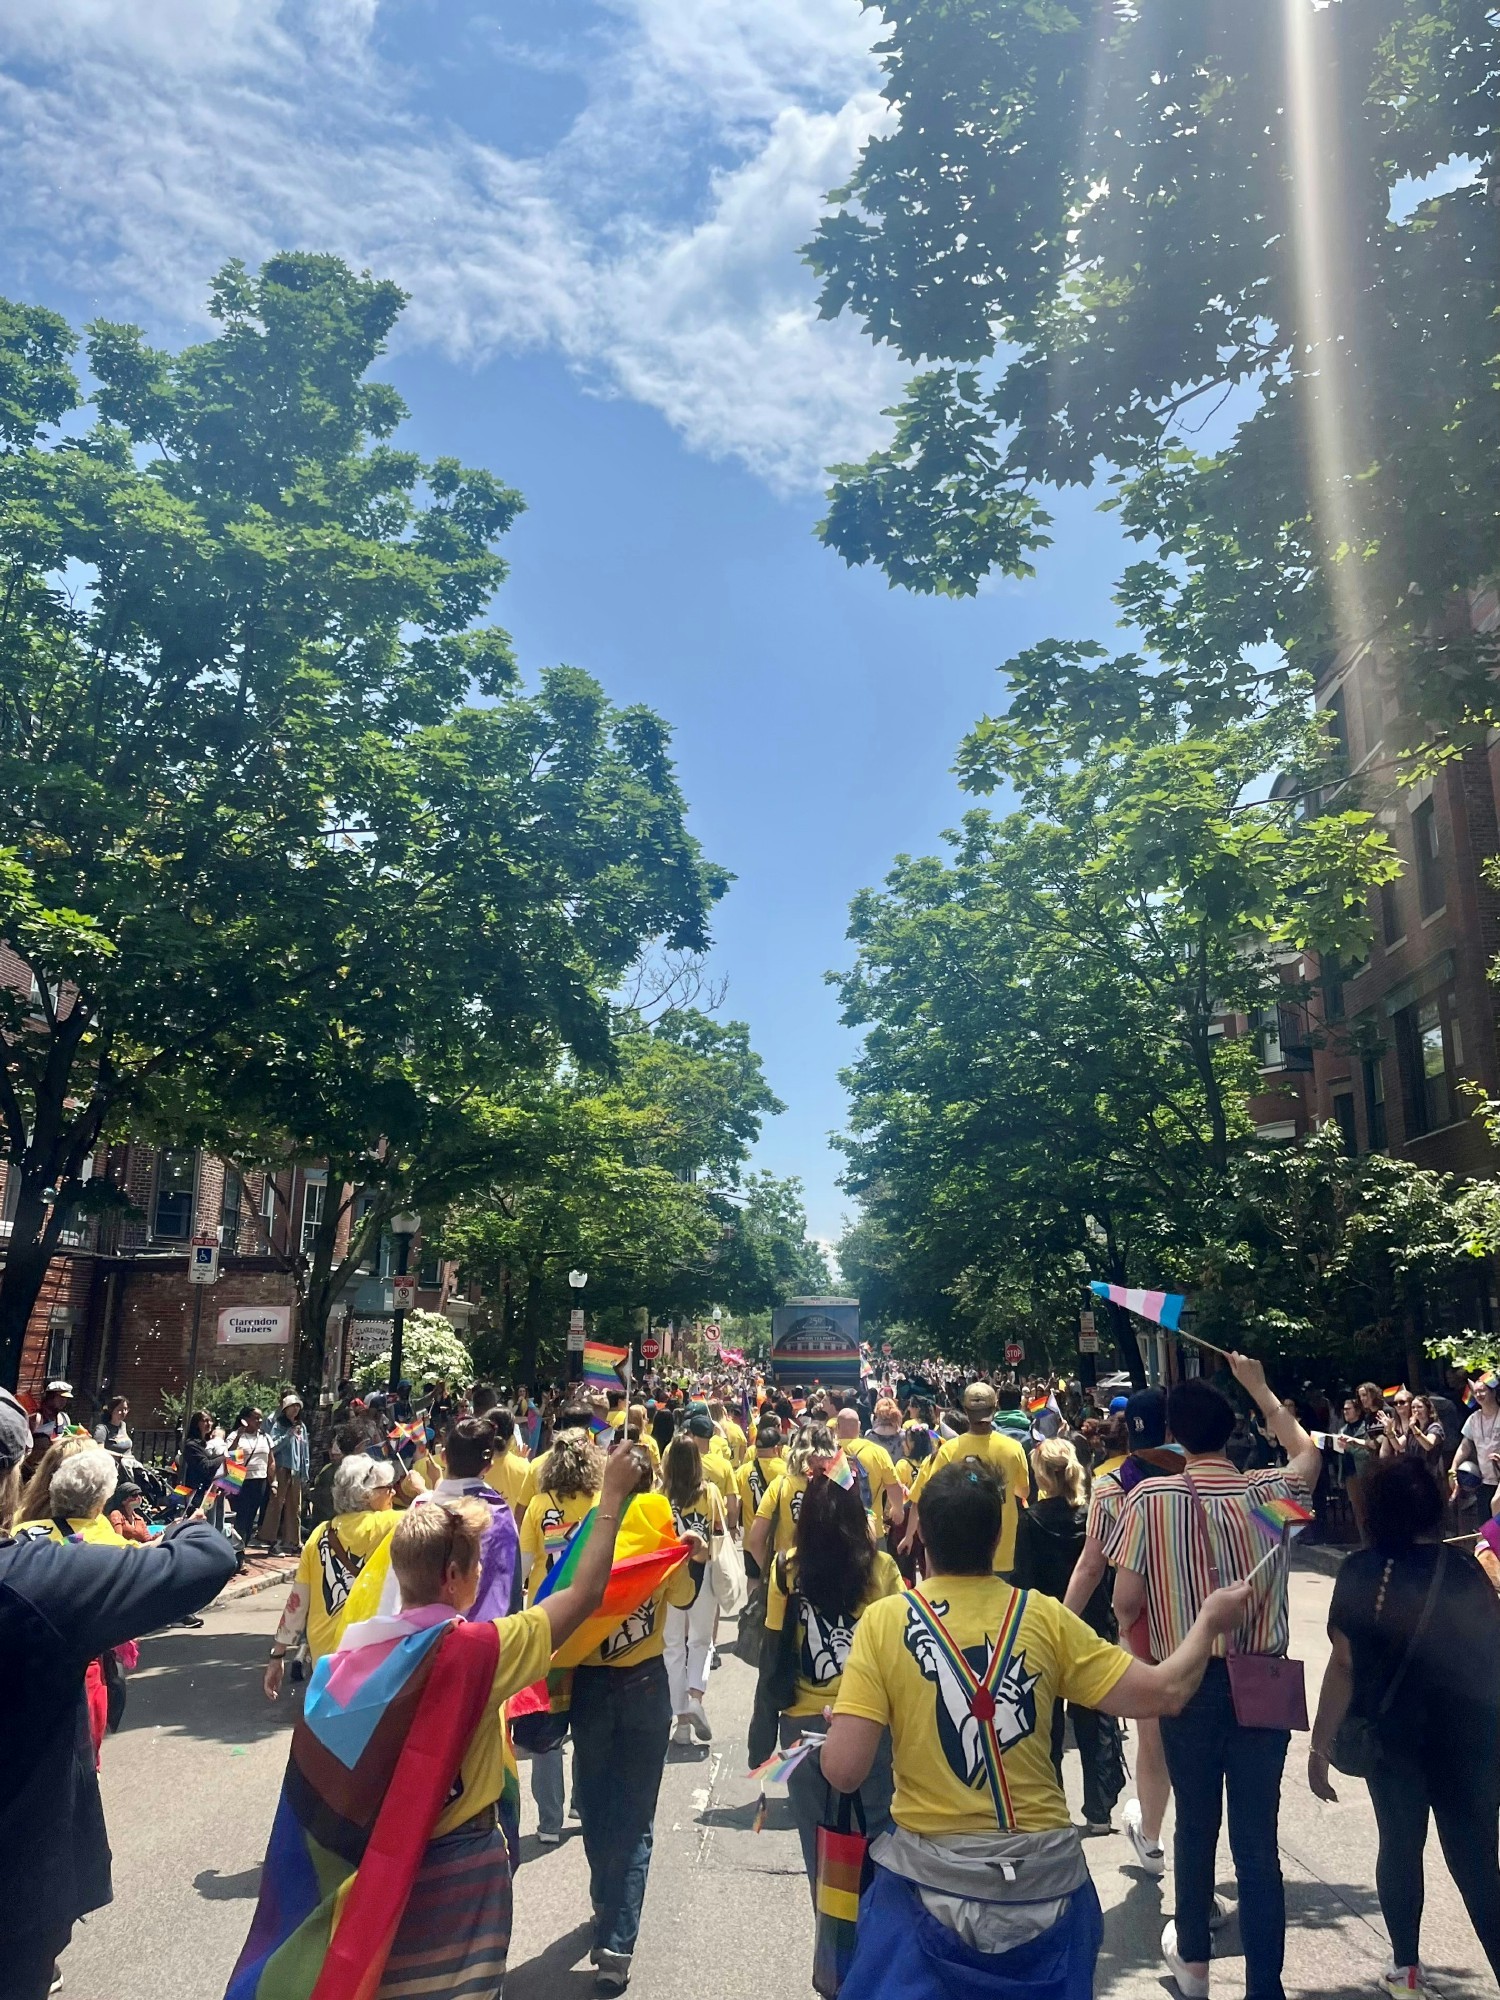 Liberty Mutual employees proudly celebrated Pride Month at parades and events across the country!